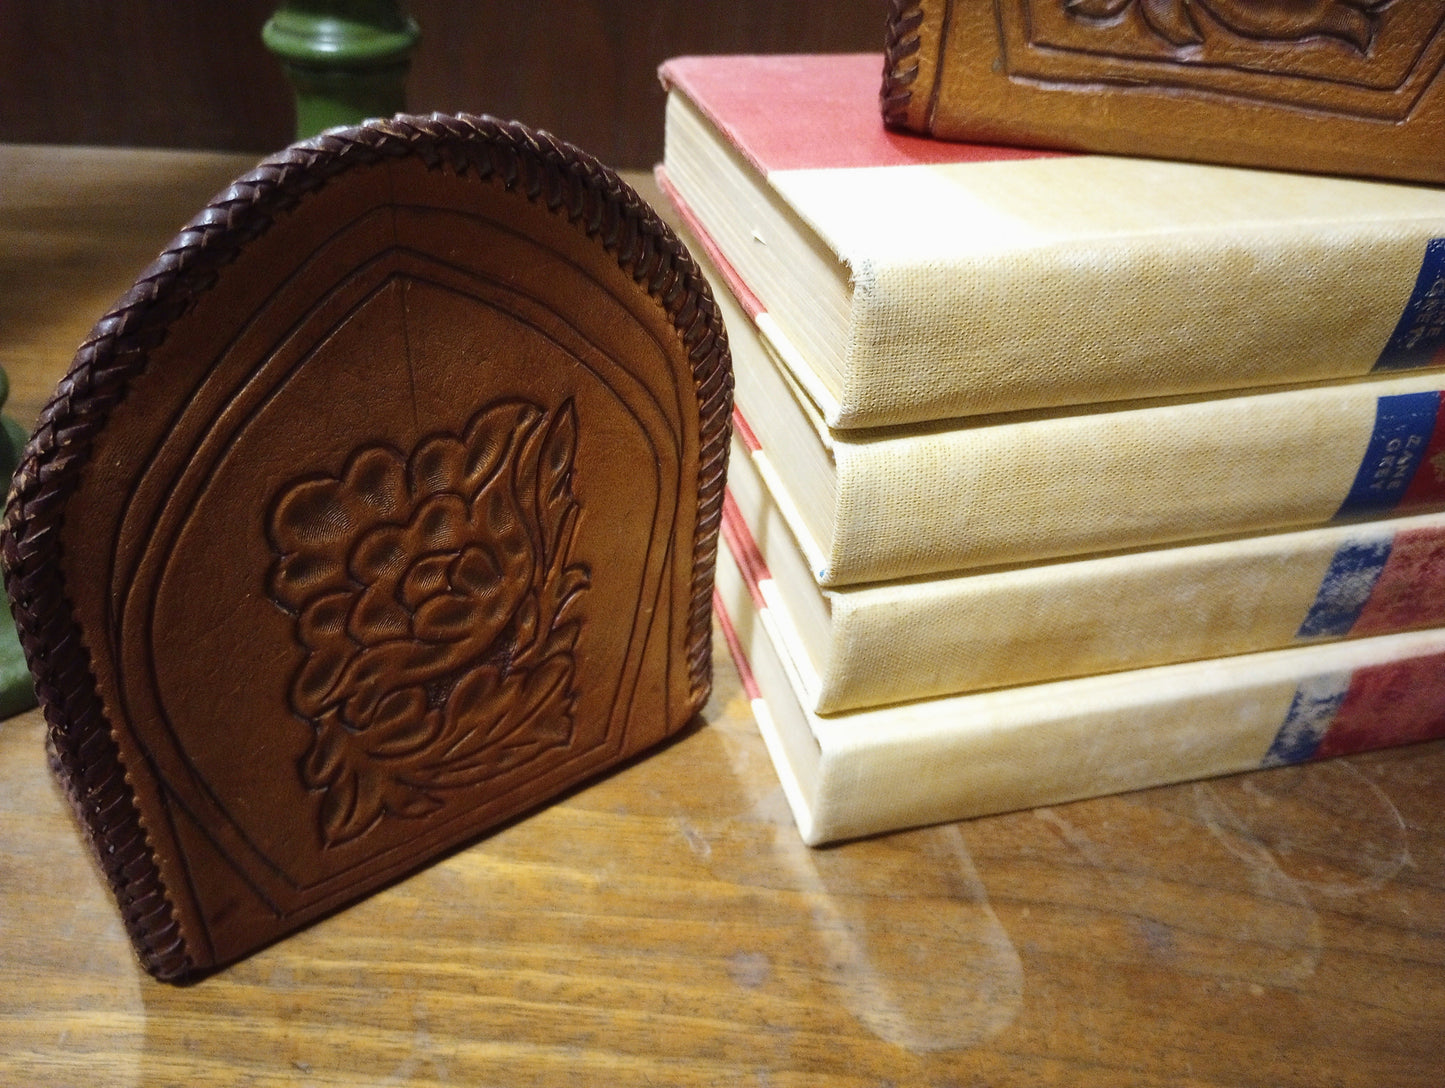 Pair of Super Cool Vintage Tooled Leather Bookends